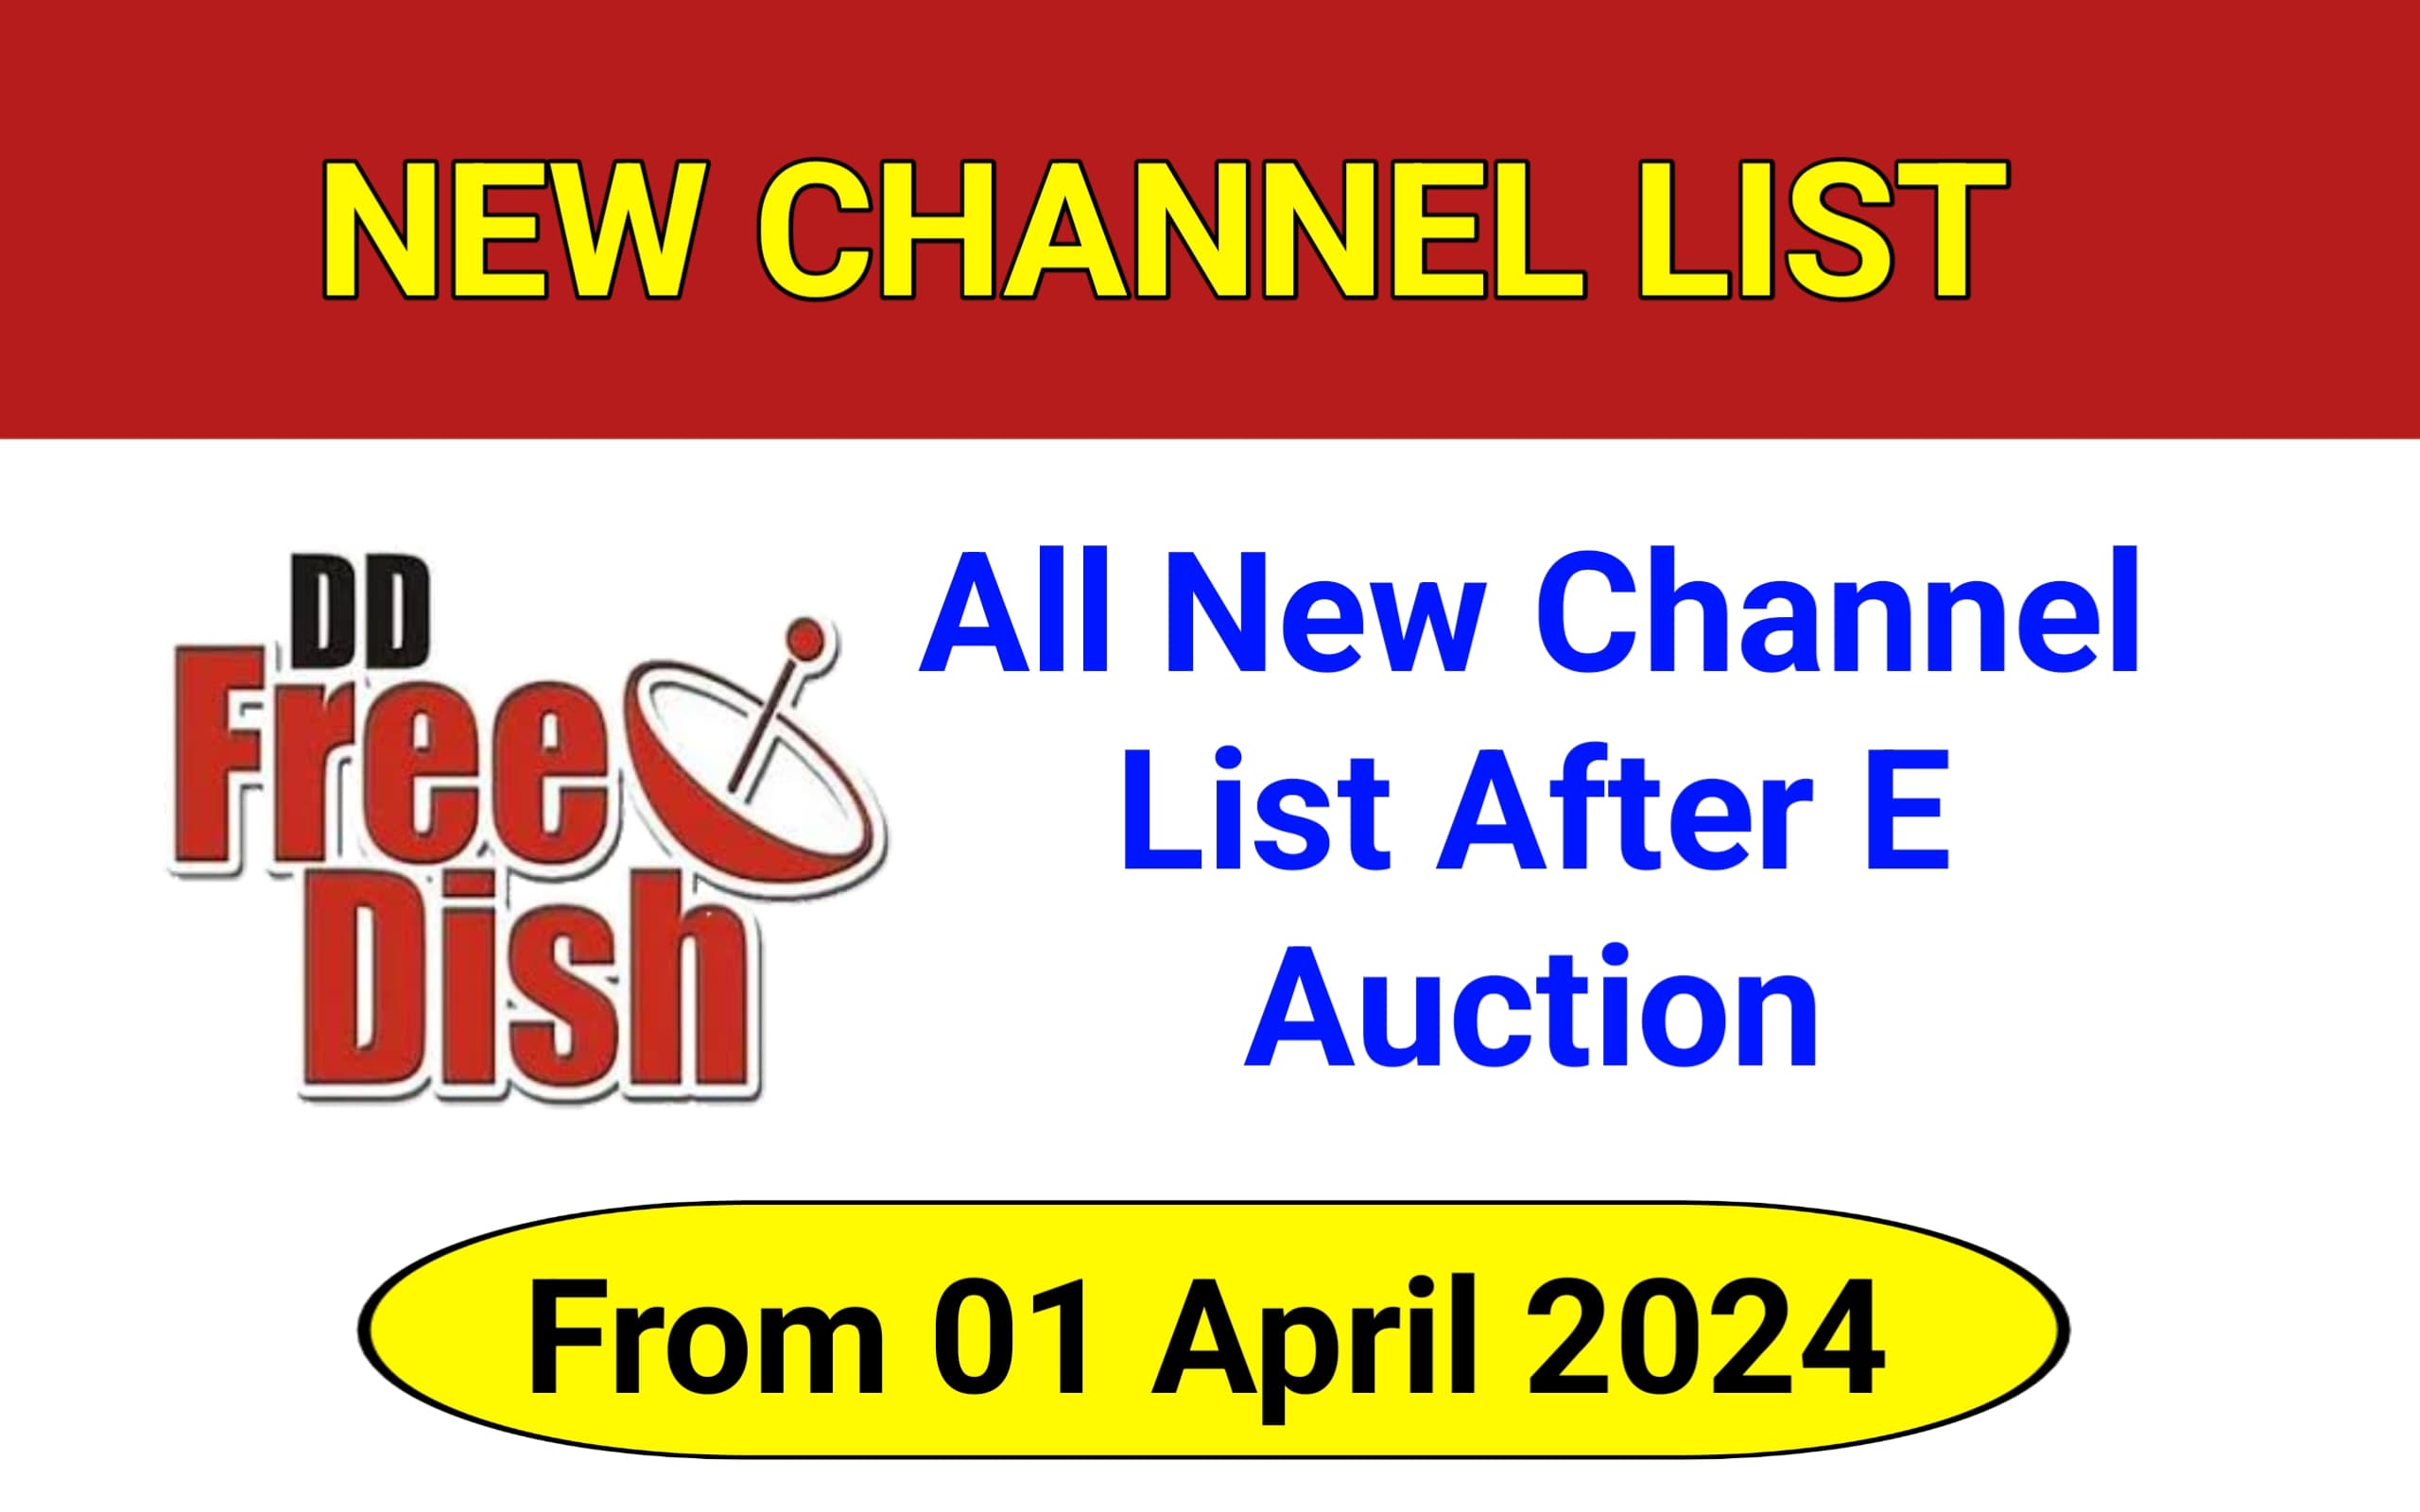 DD Free Dish New Channel List After E Auction 2024